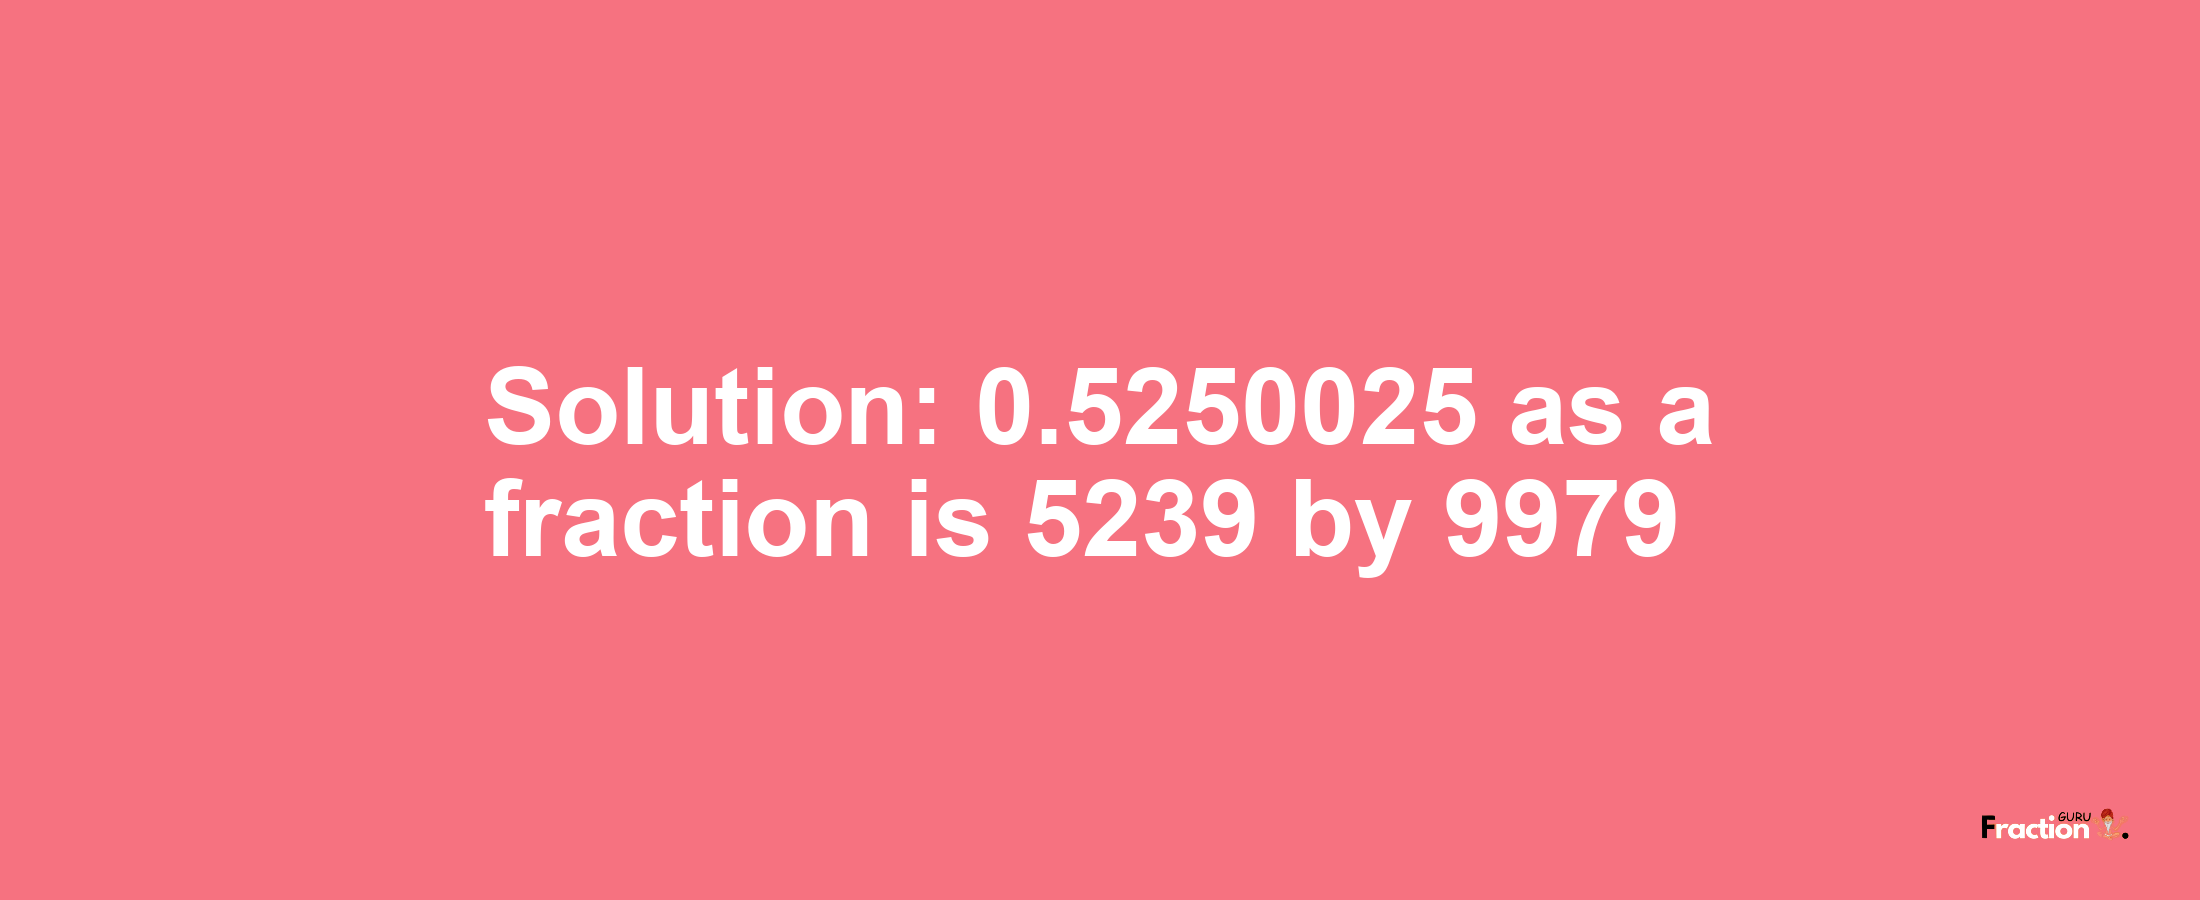 Solution:0.5250025 as a fraction is 5239/9979